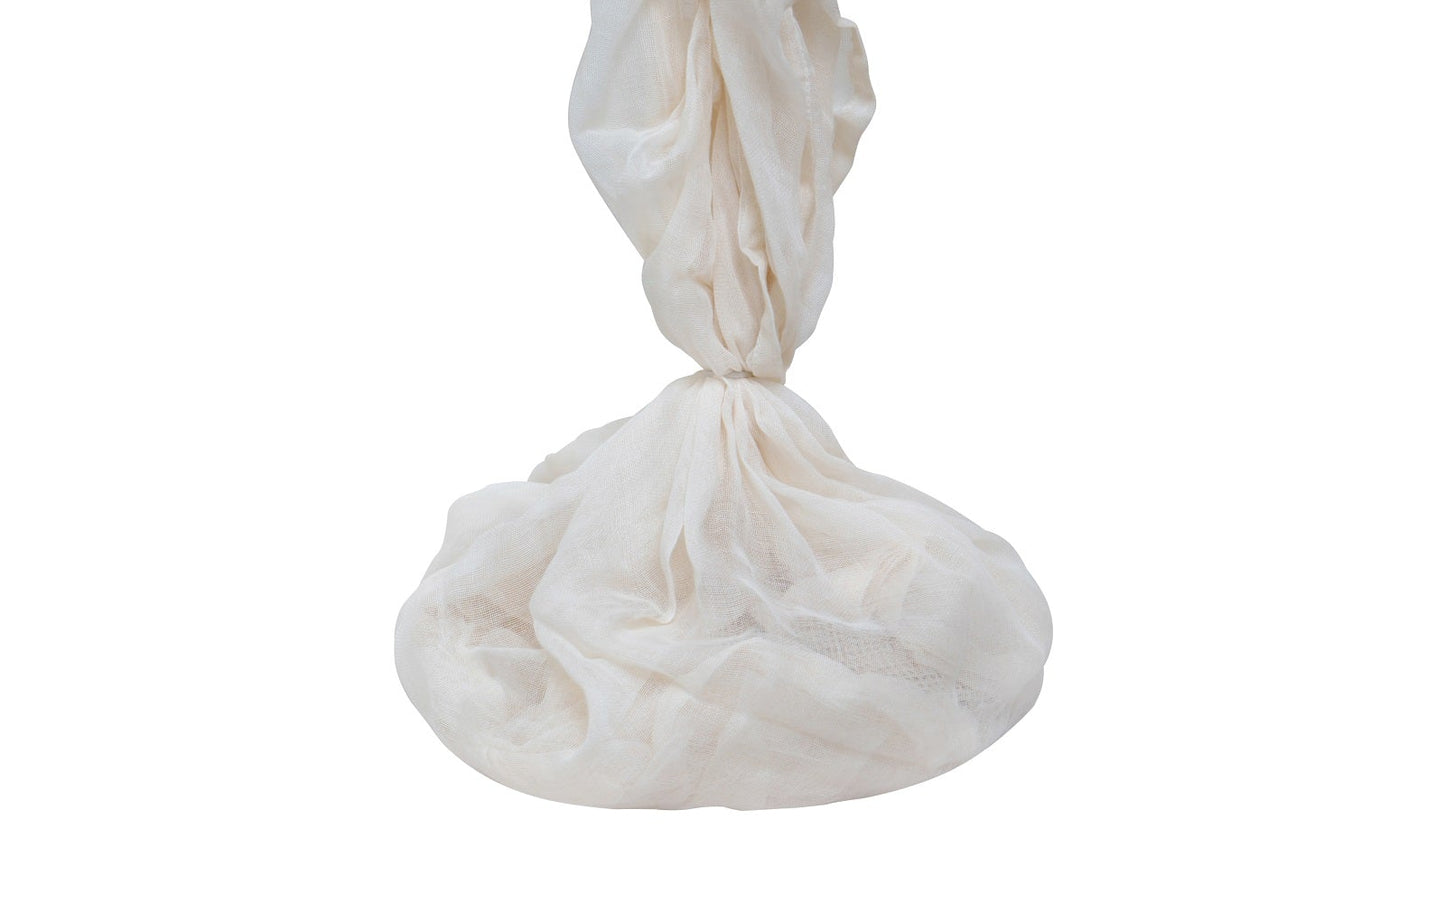 Cotton Cheese Cloth Muslin Strain Straining Cooking Making Draining  Cleaning